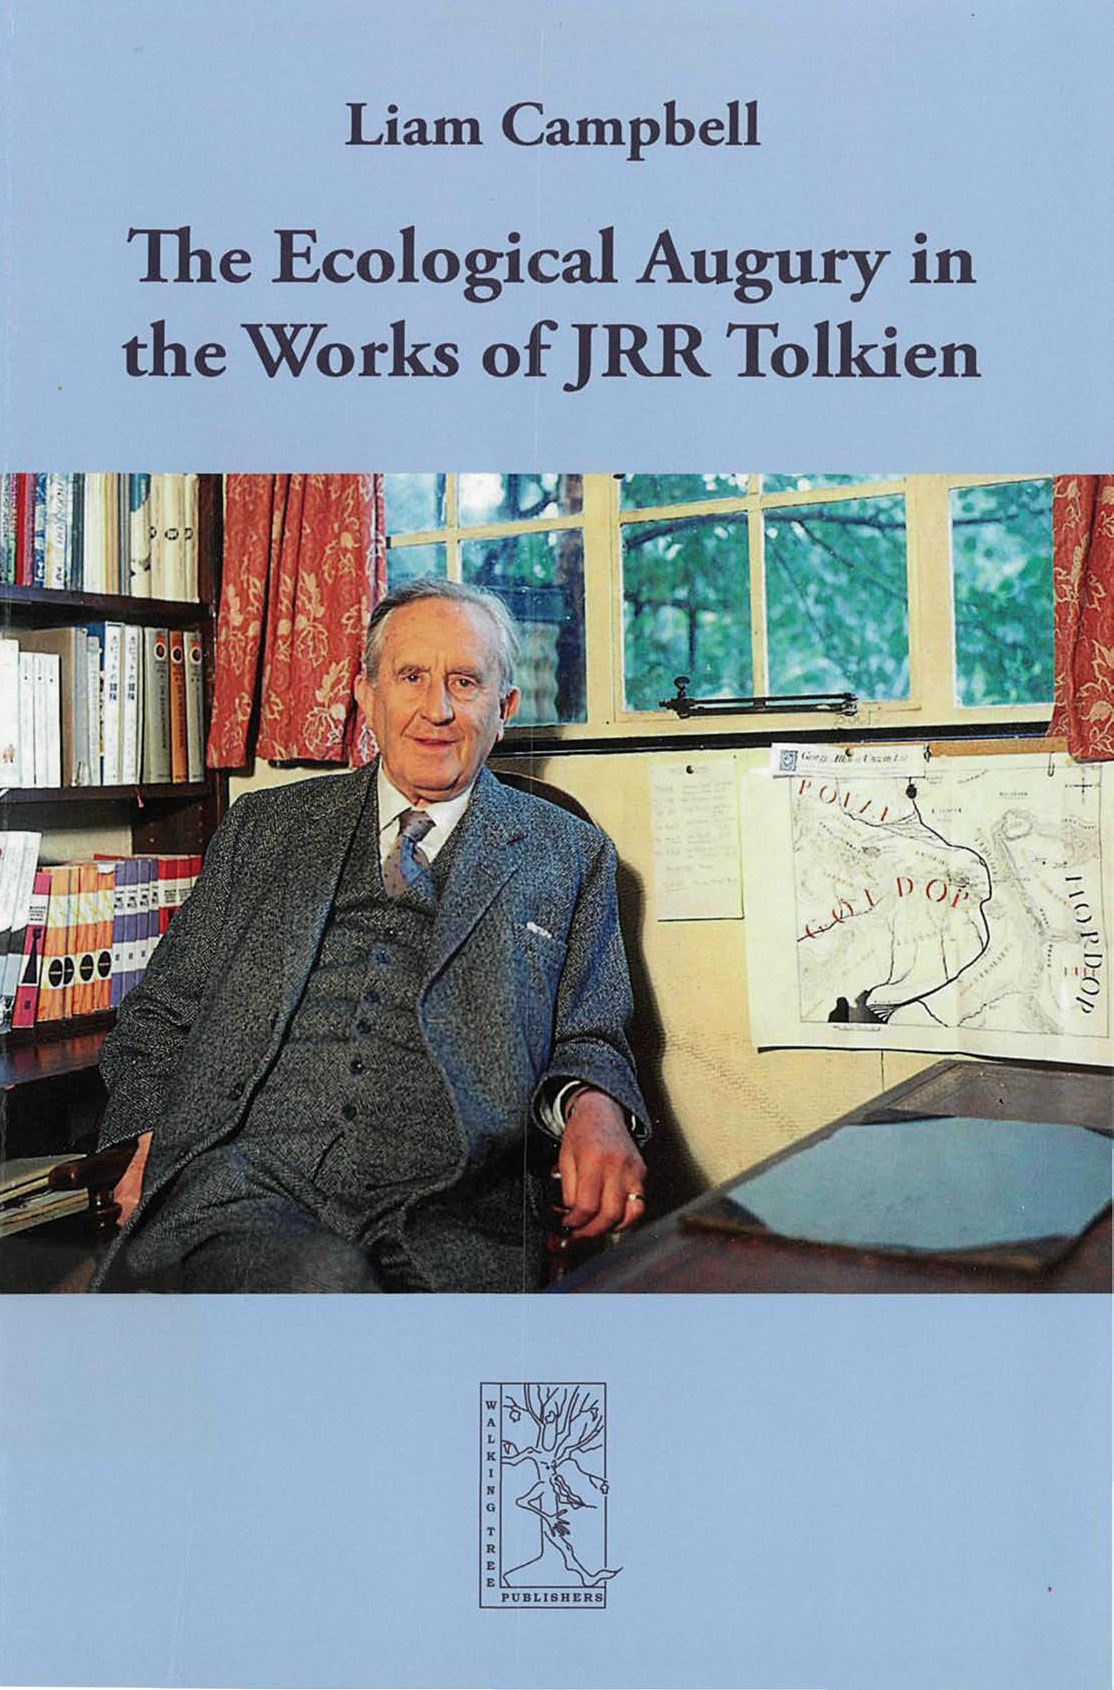 The Ecological Augury in the Works of JRR Tolkien (Cormarë Series #21)